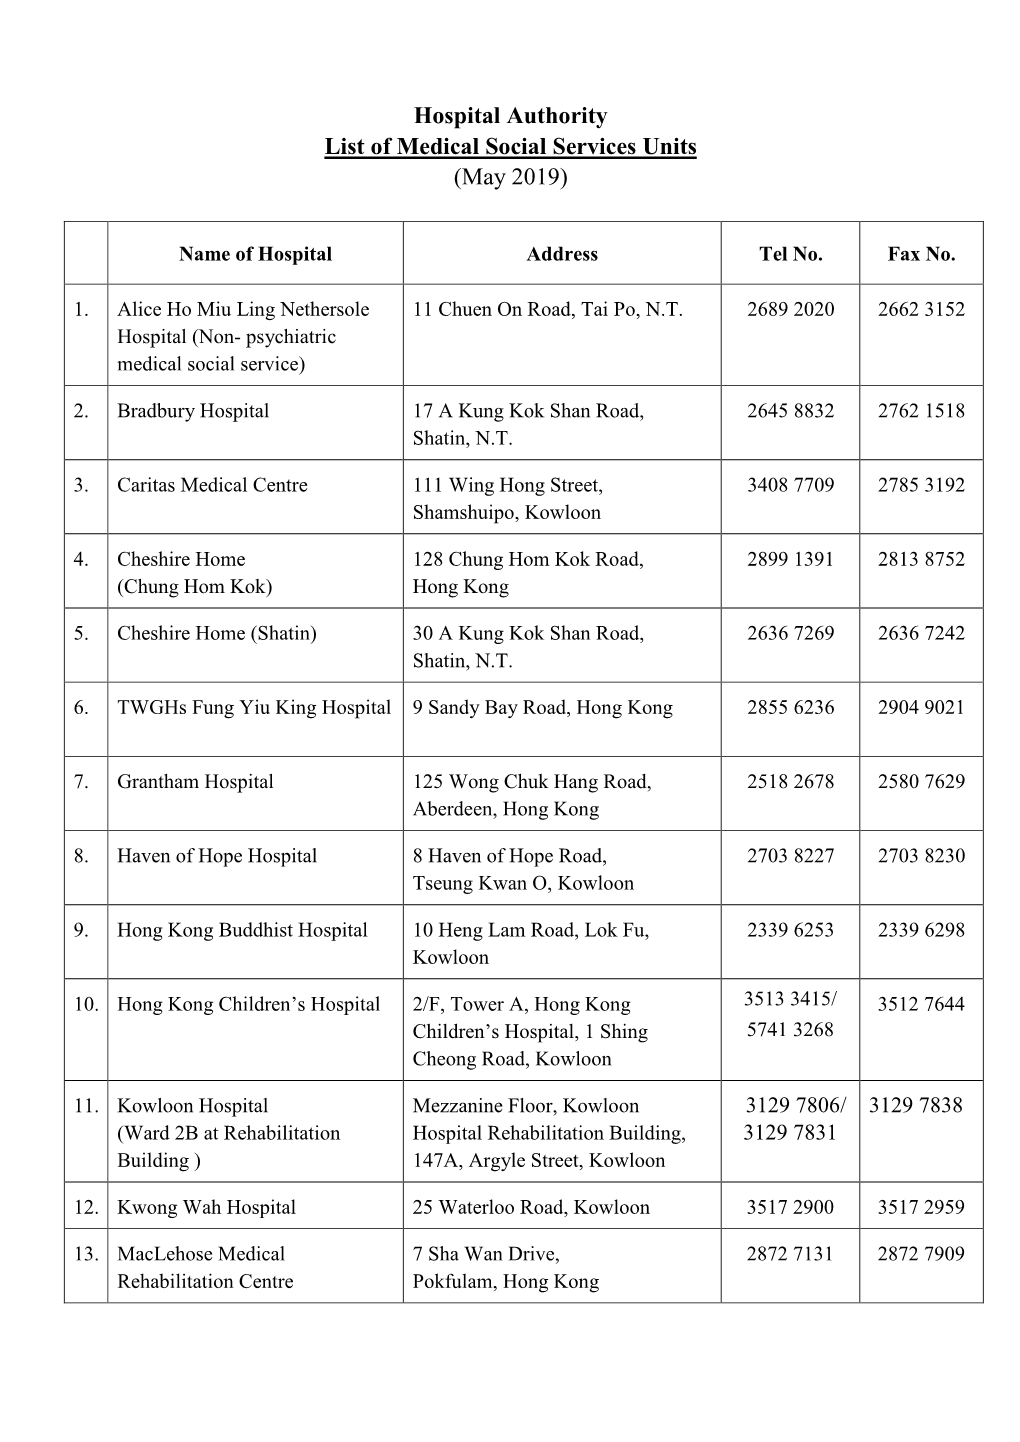 Hospital Authority List of Medical Social Services Units (May 2019)